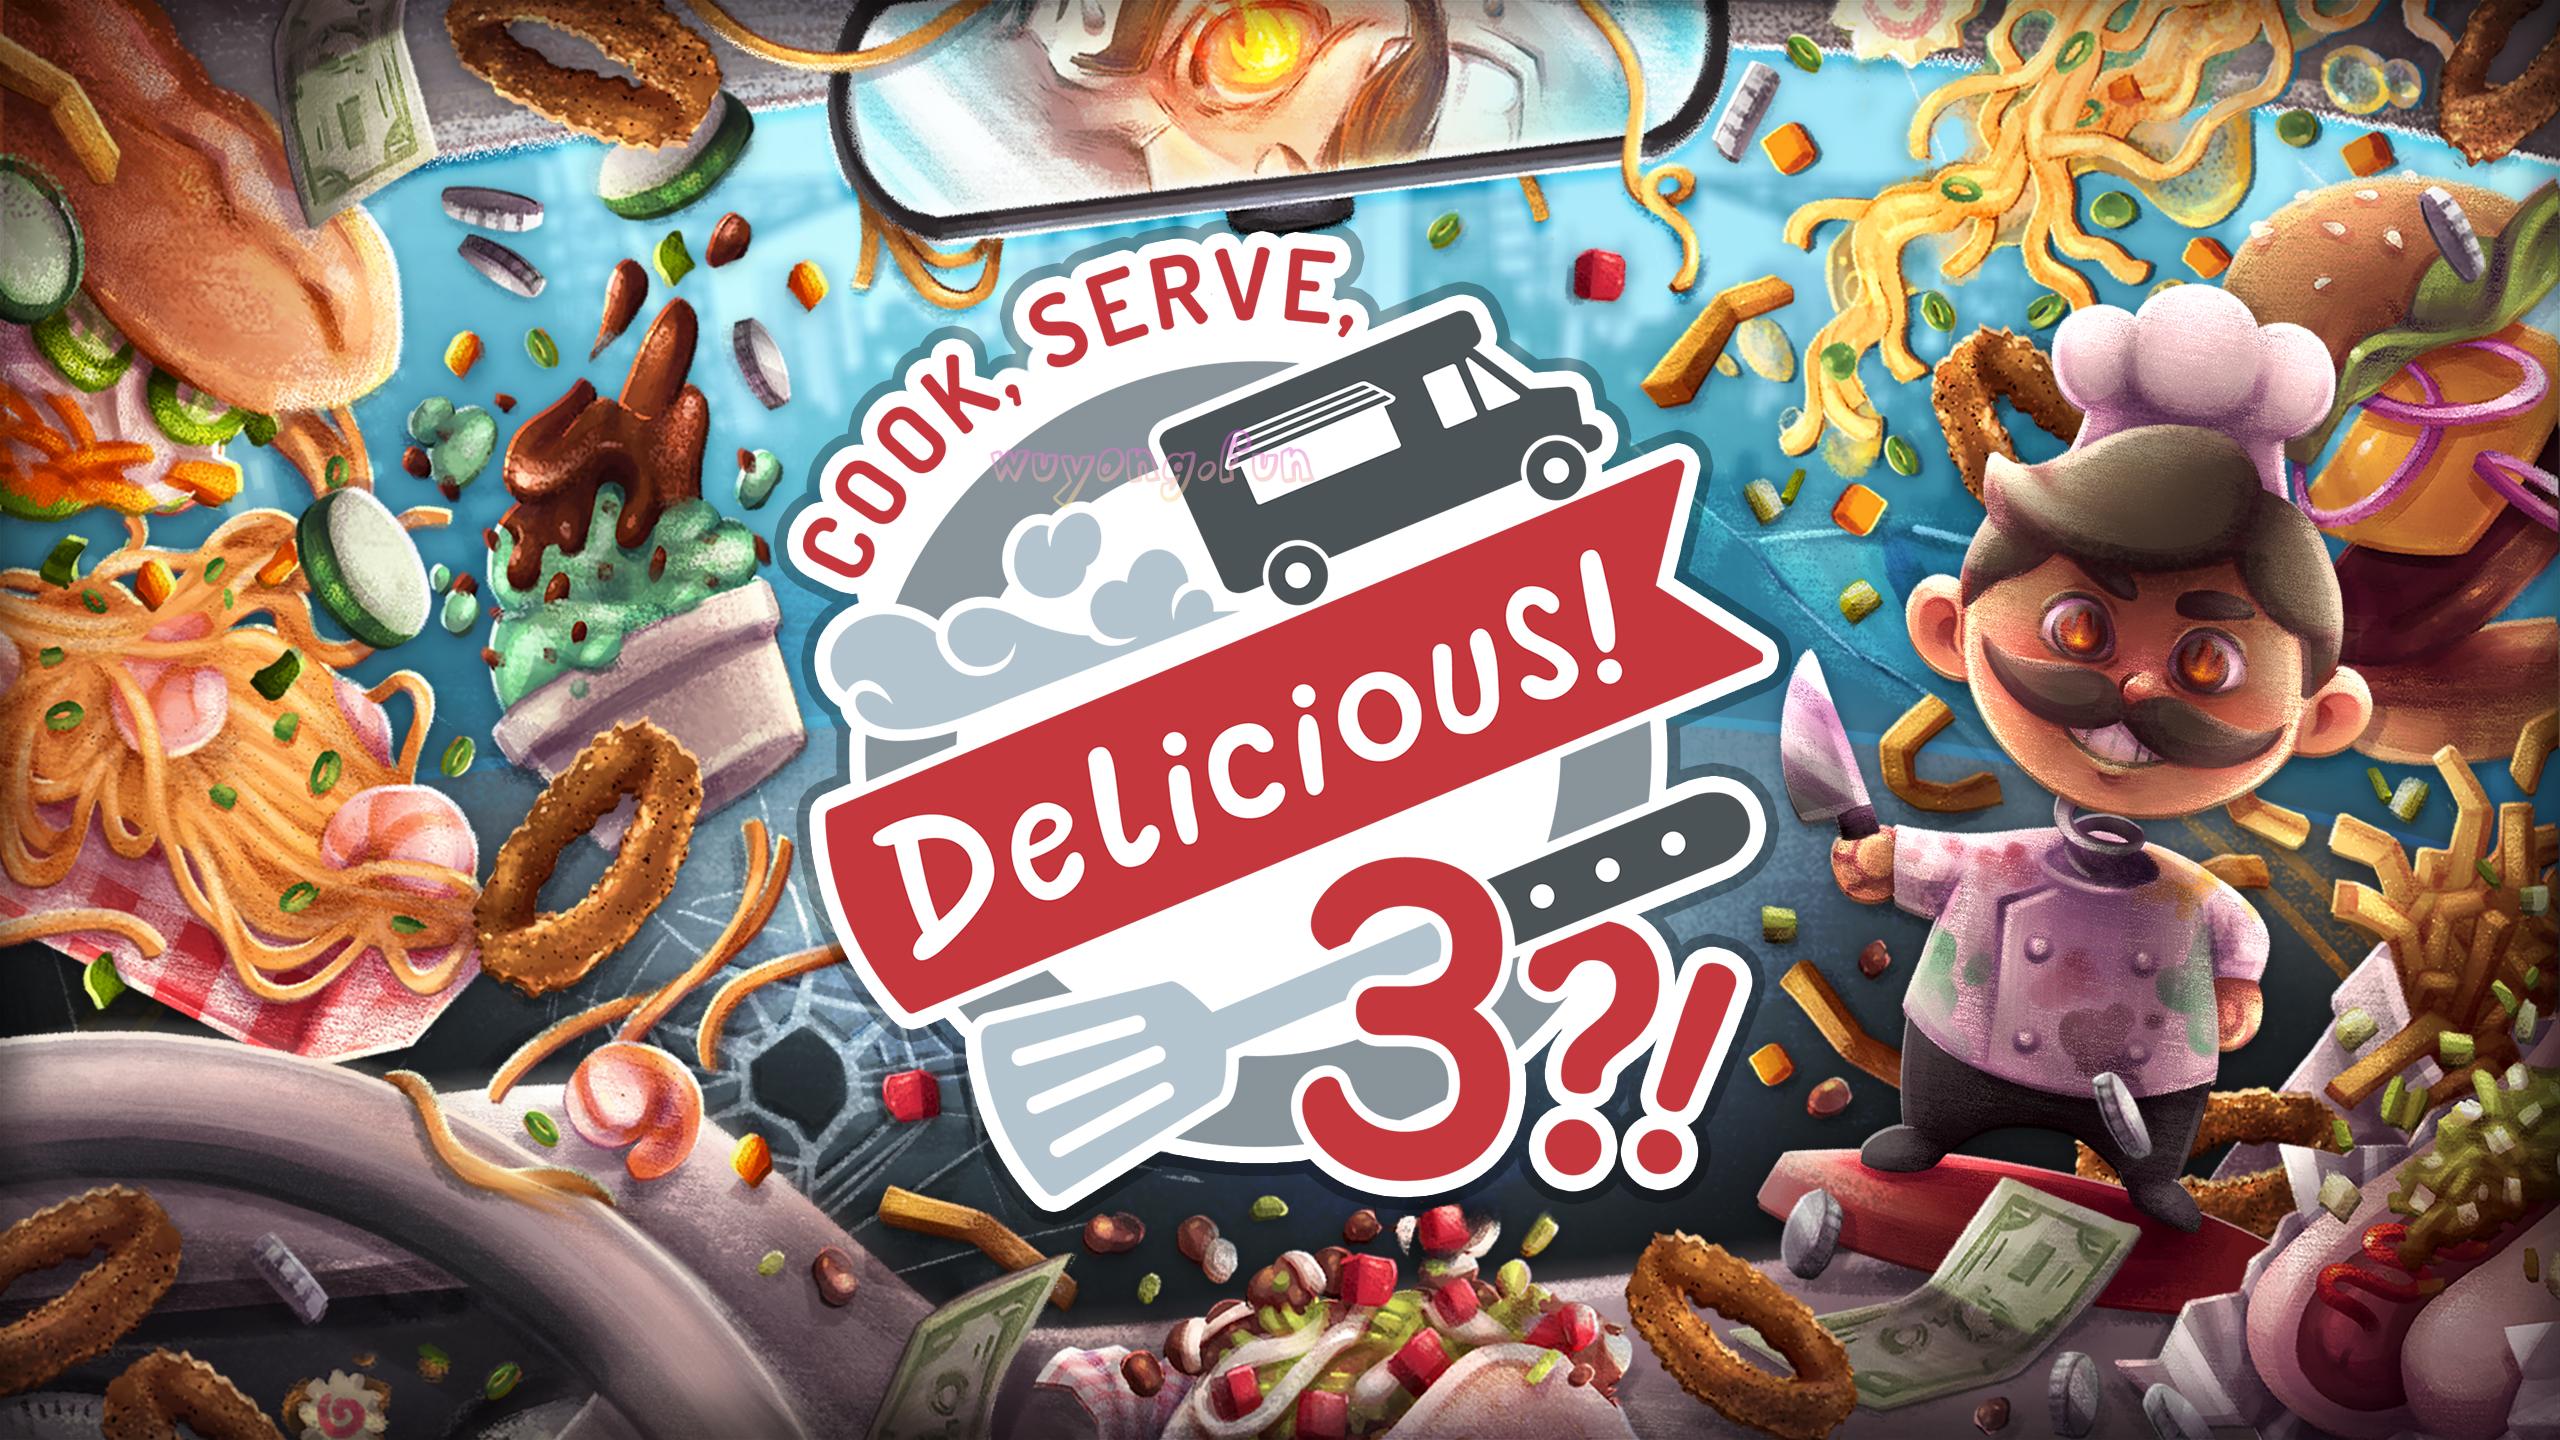 Epic Games限时免费领取《Cook, Serve, Delicious! 3?!》